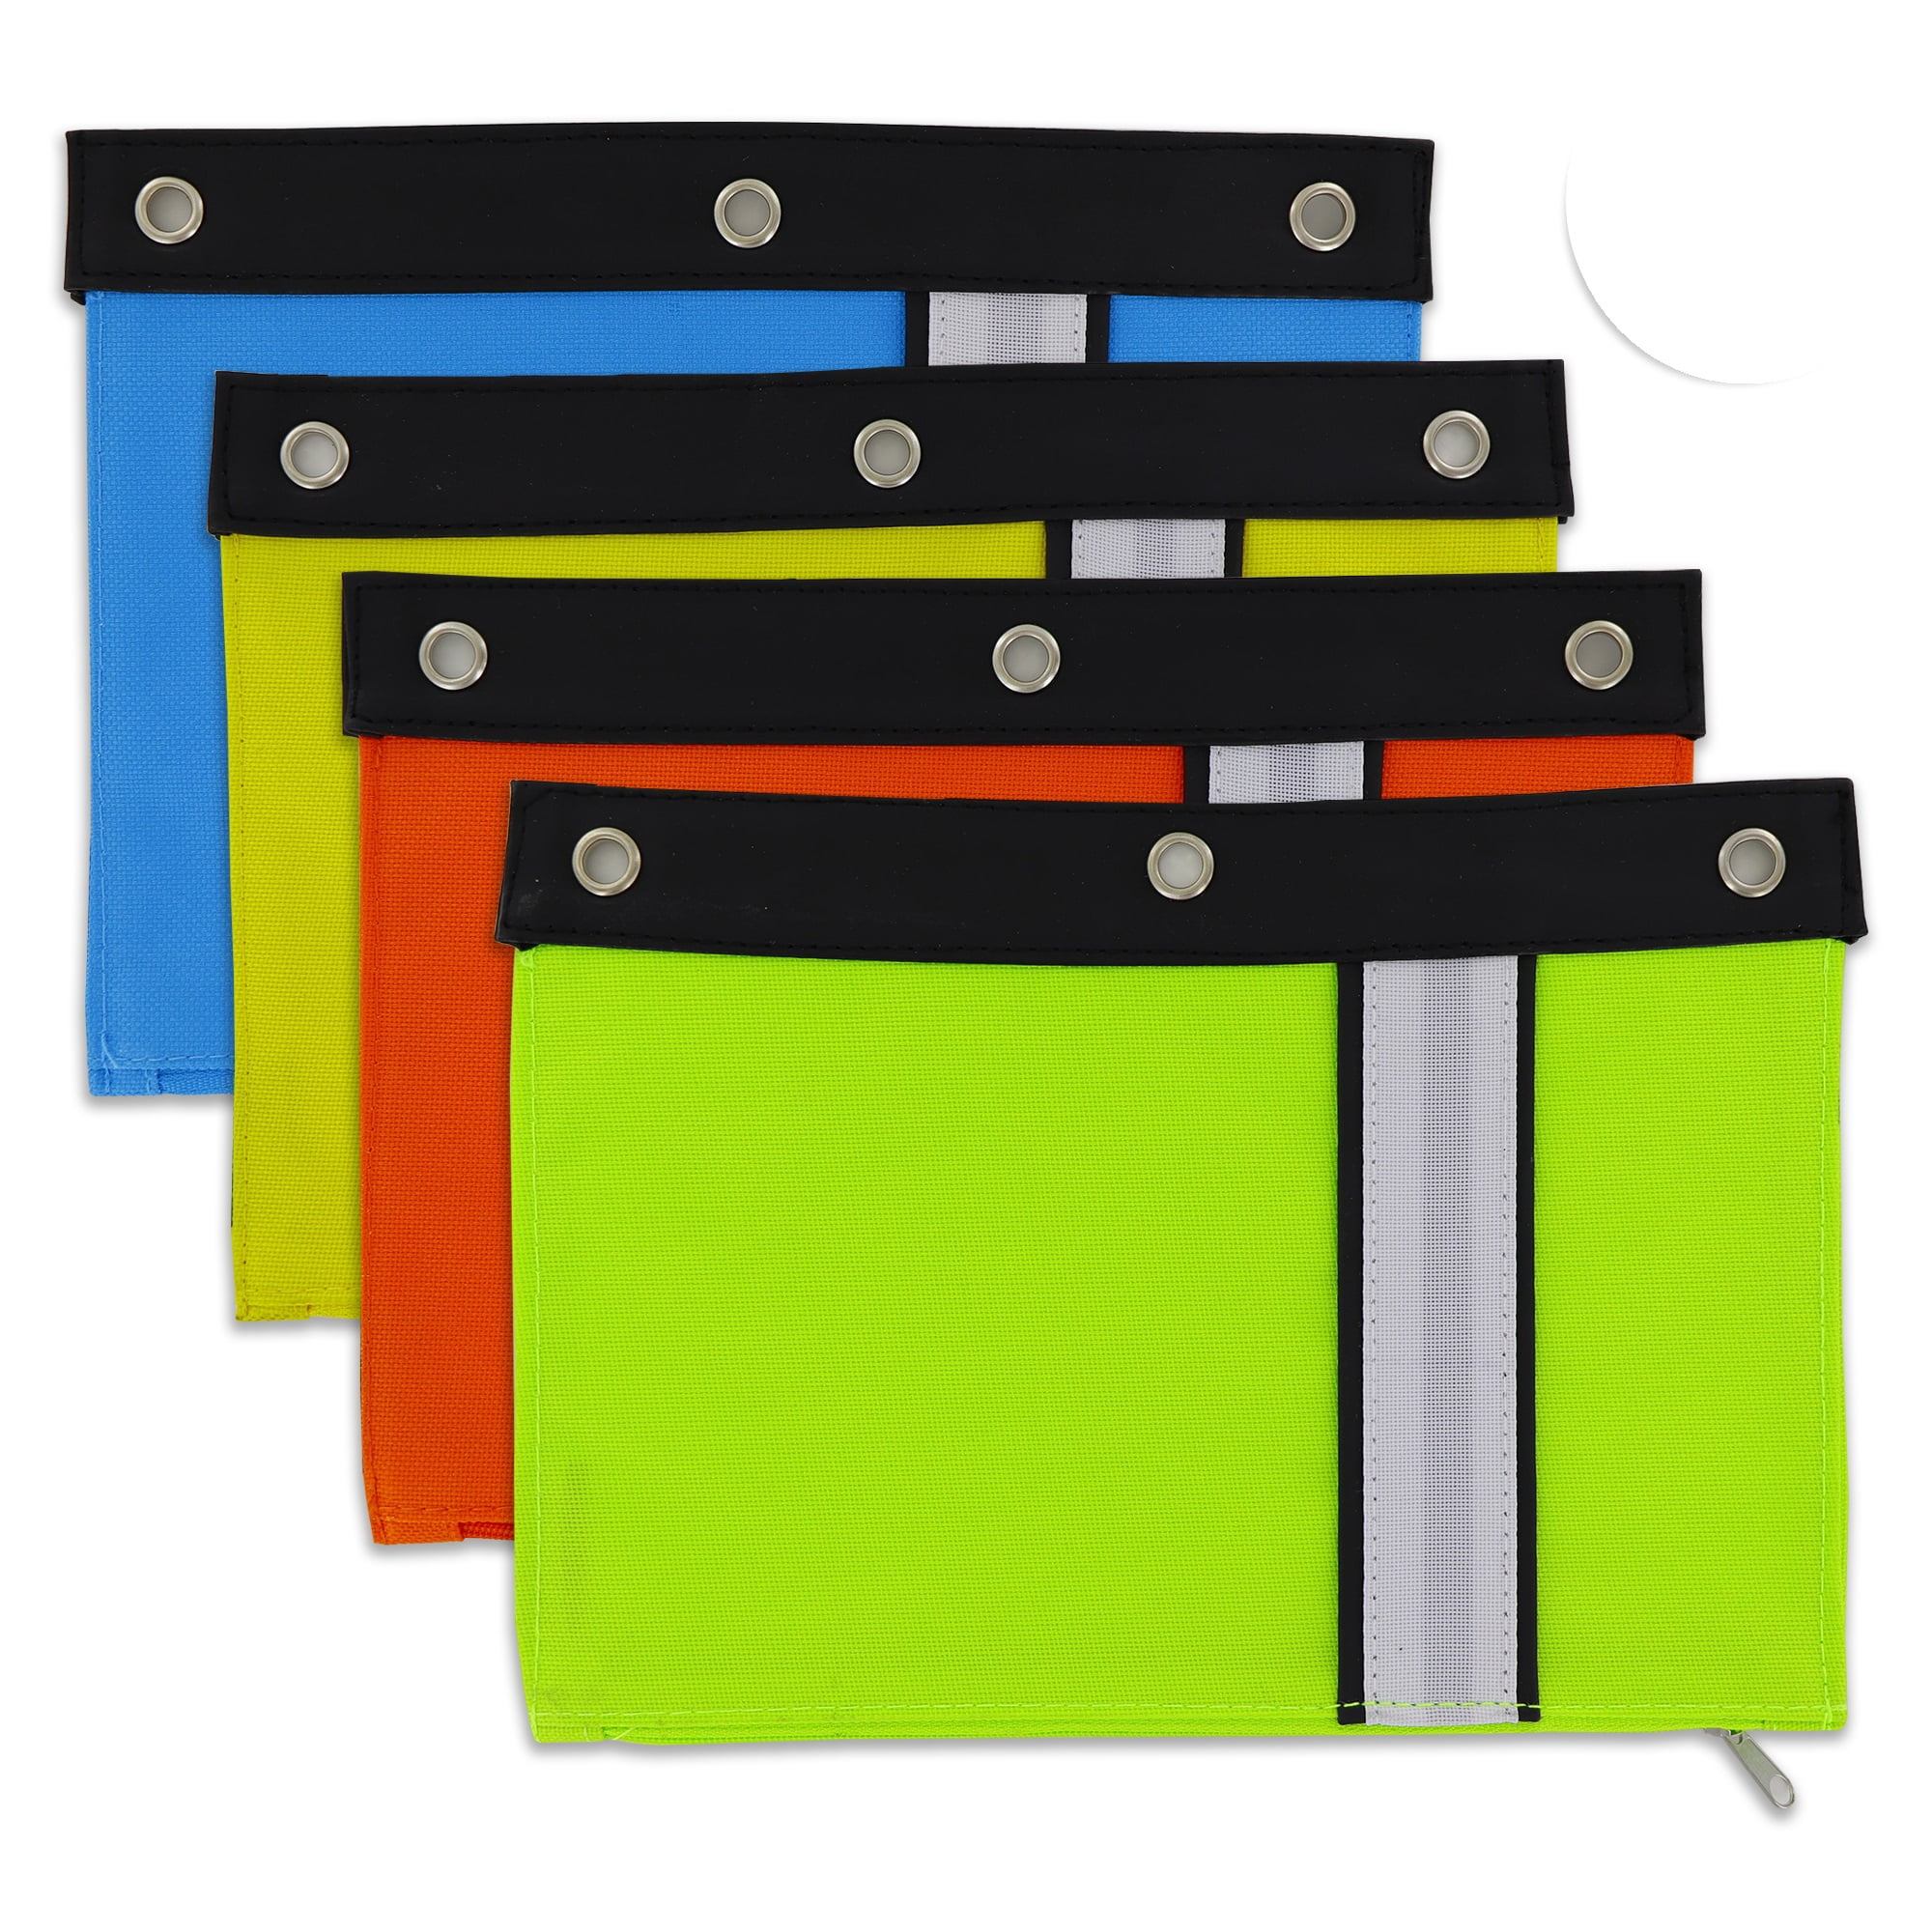 1 Count Fits 3 Ring Binders Pencil Pouch Pen Case Color Selected for You Xpanz